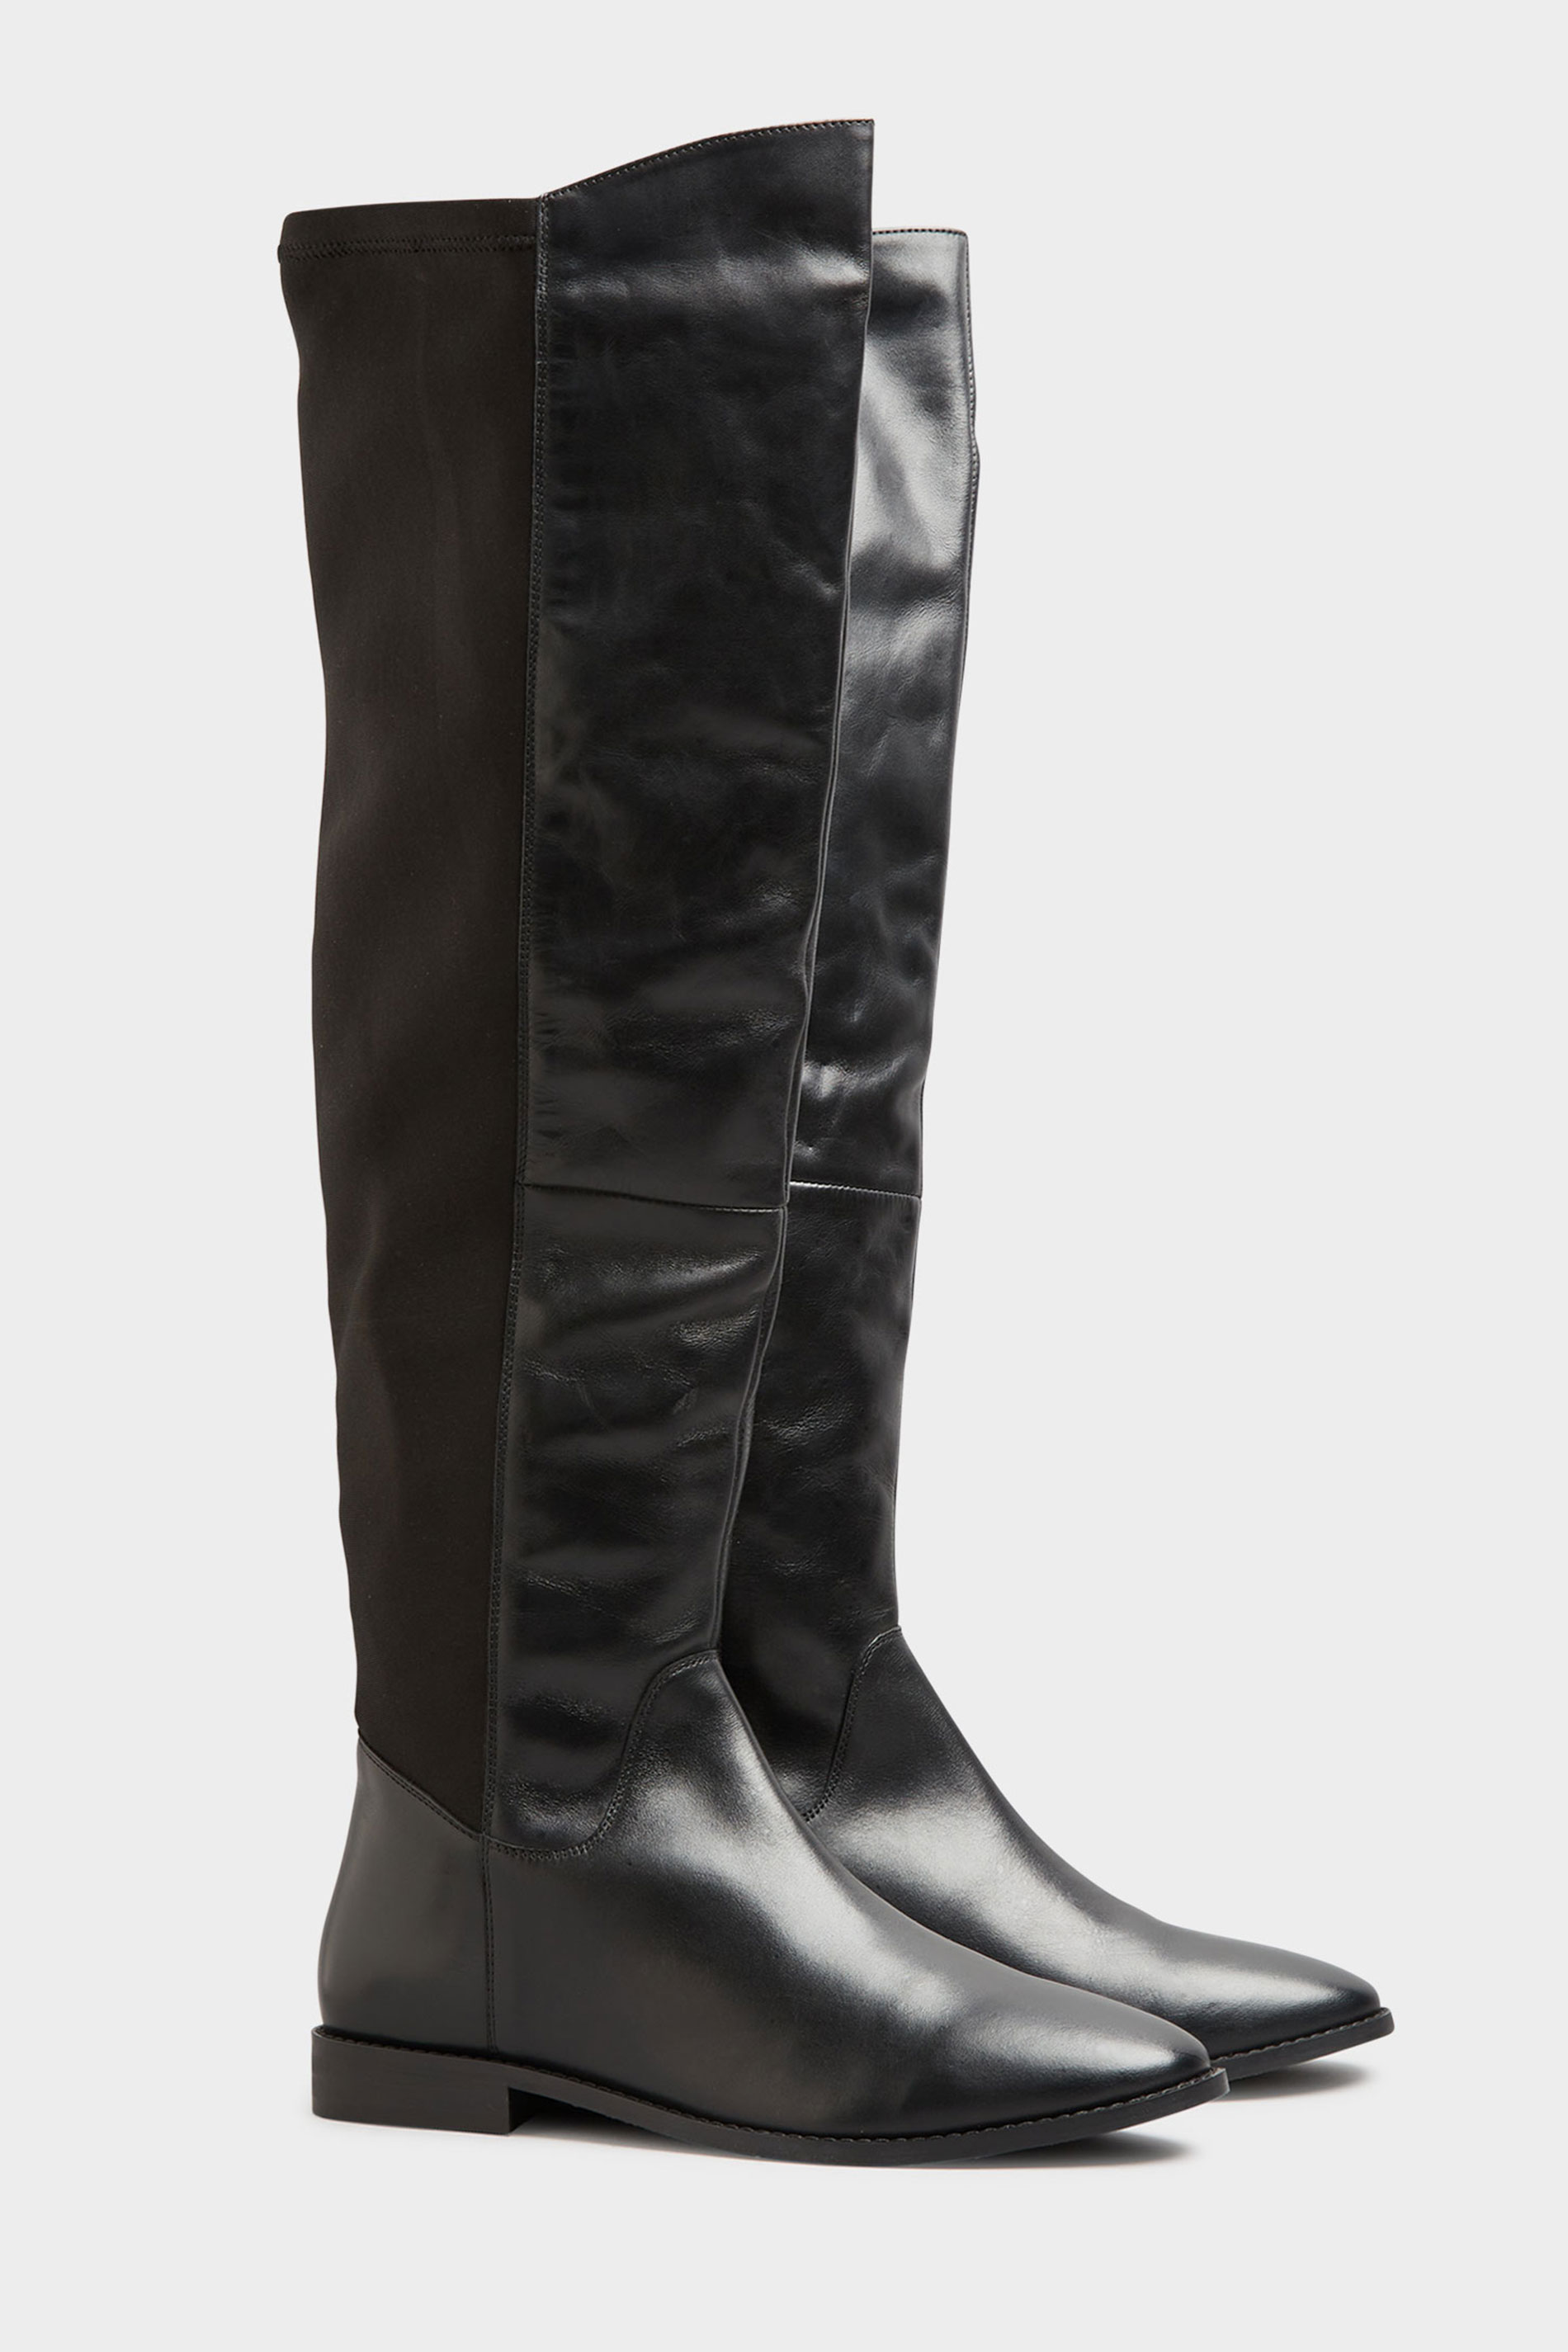 LTS Black Faux Leather Stretch Knee High Boots_B.jpg